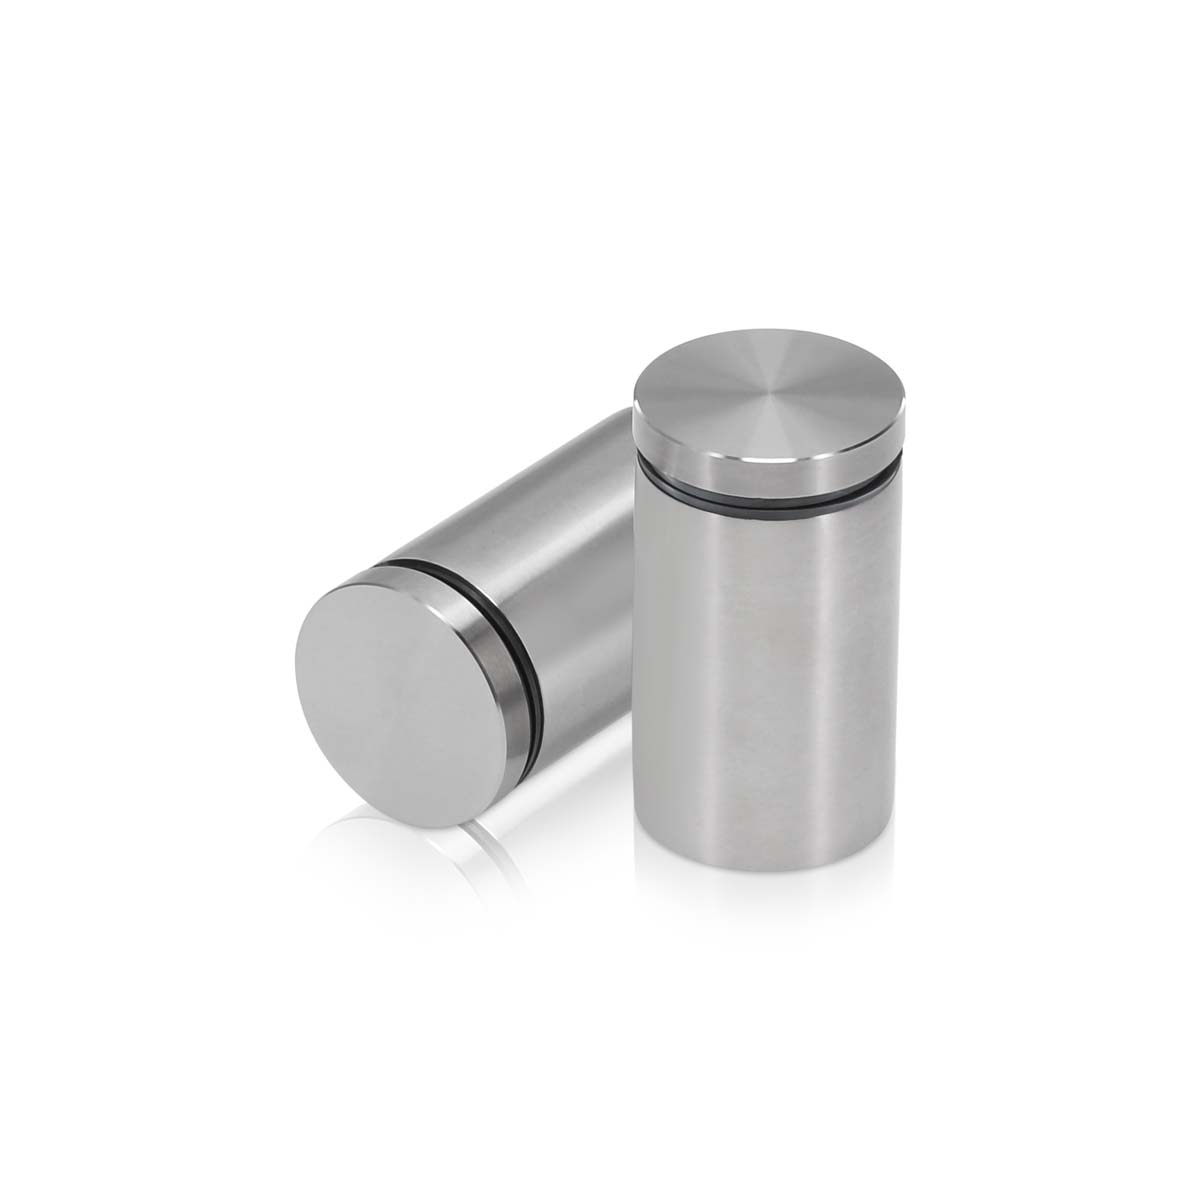 1-1/4'' Diameter X 1-3/4'' Barrel Length, Stainless Steel Brushed Finish. Easy Fasten Standoff (For Inside Use Only) [Required Material Hole Size: 7/16'']